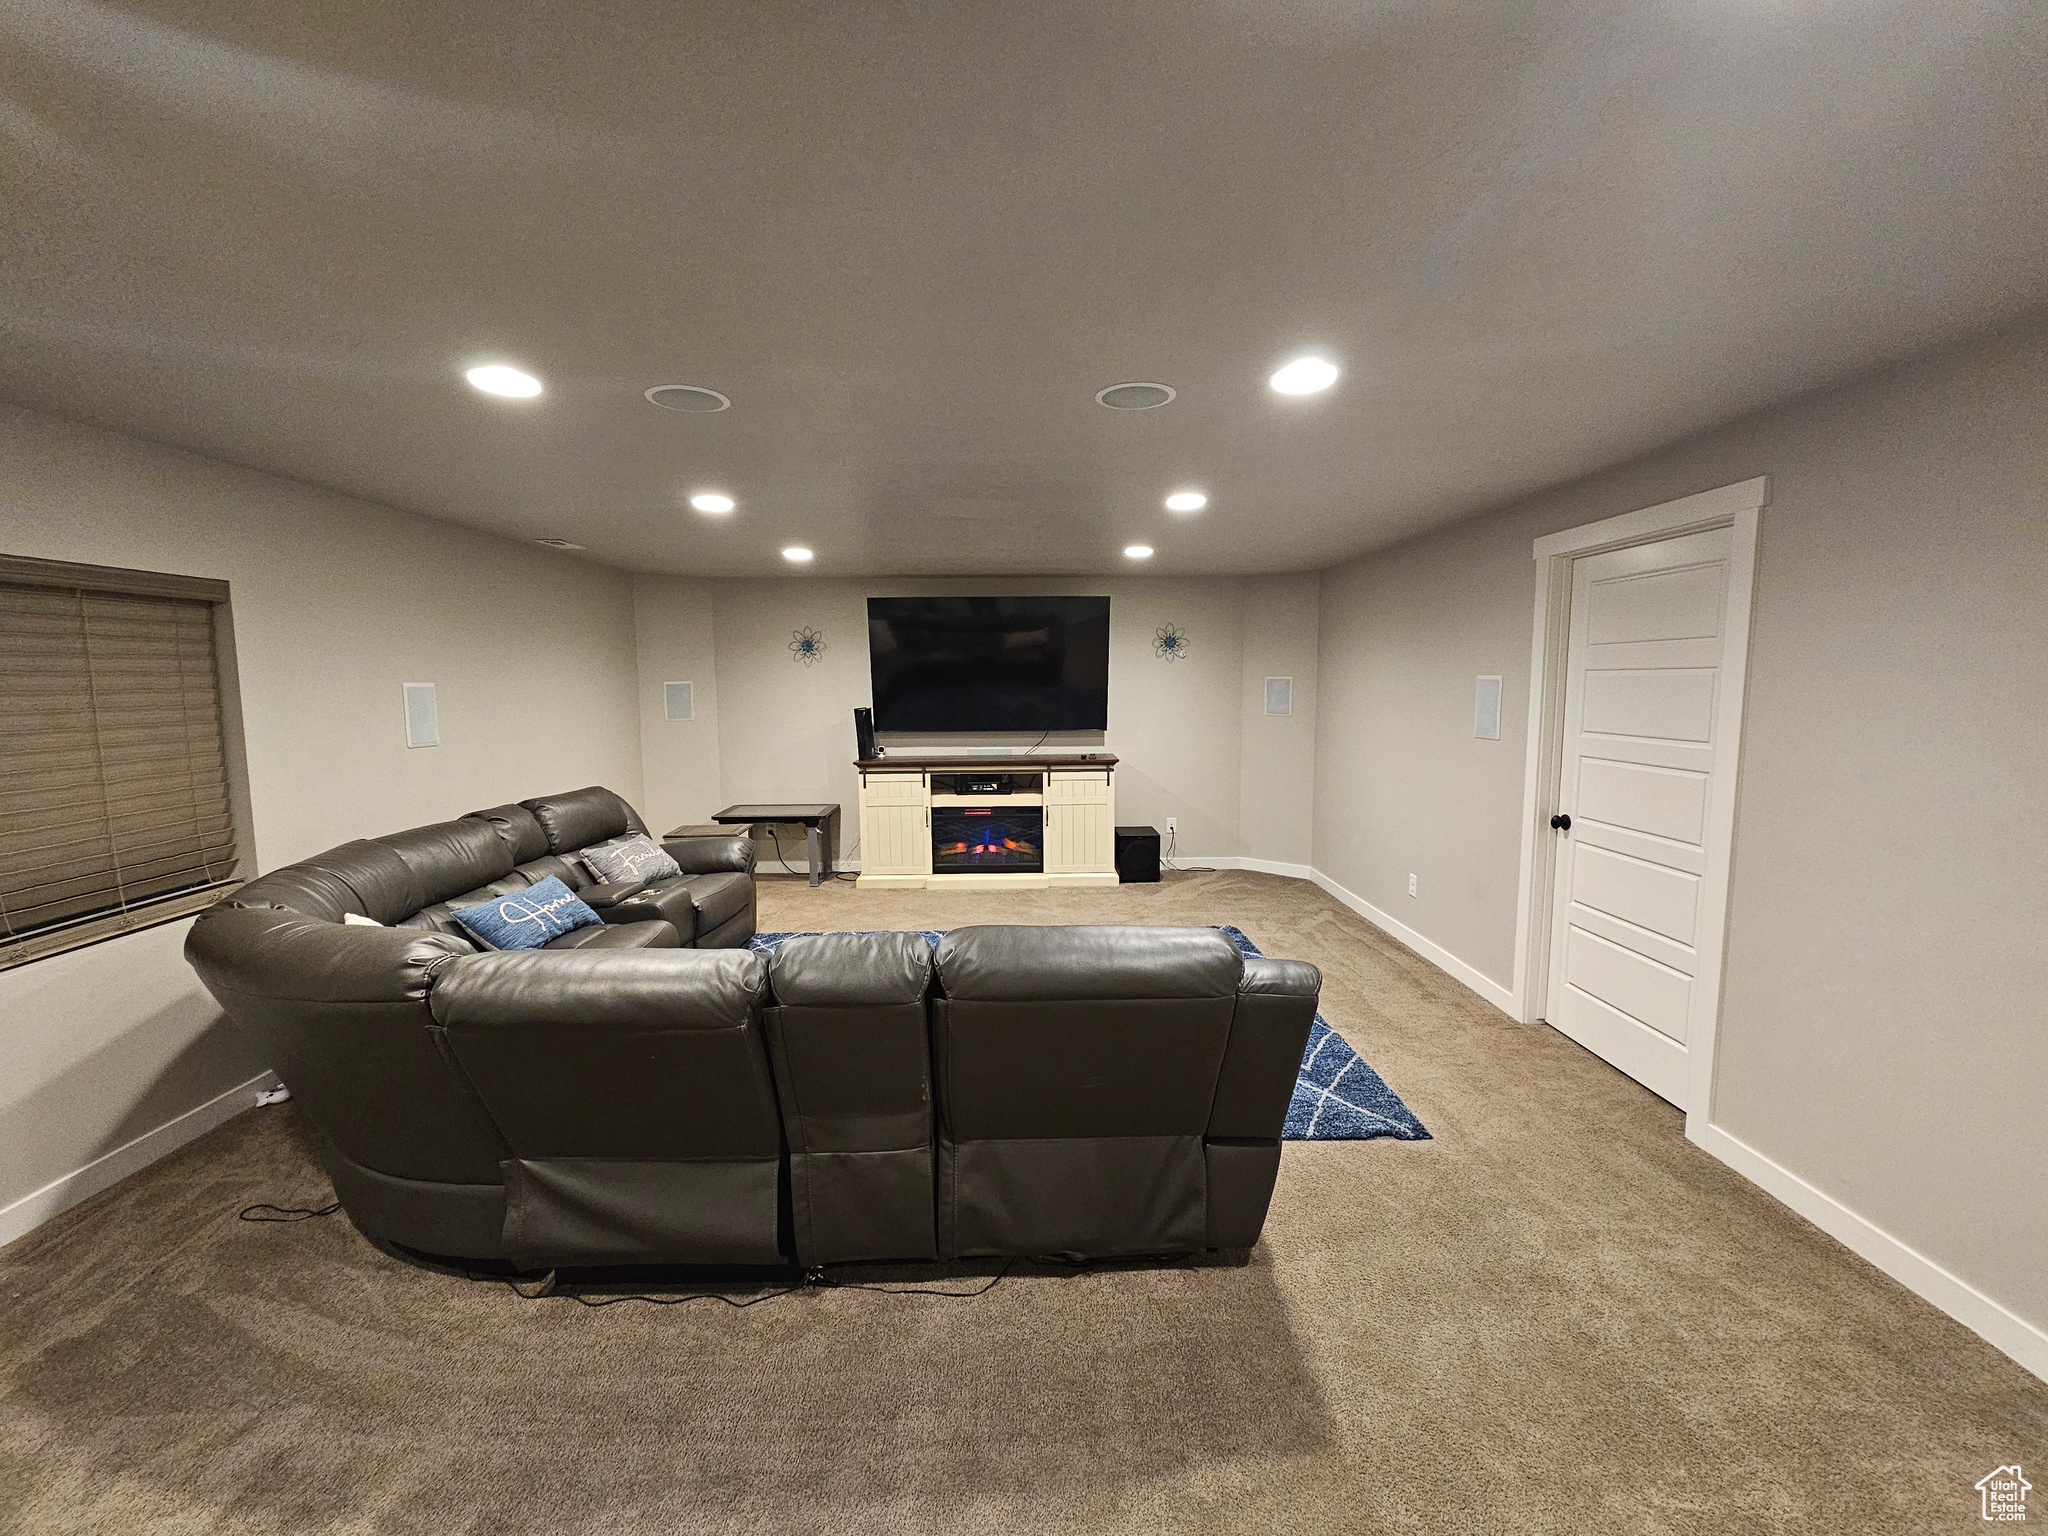 Family room with the door to the storage that can be doubled as an office